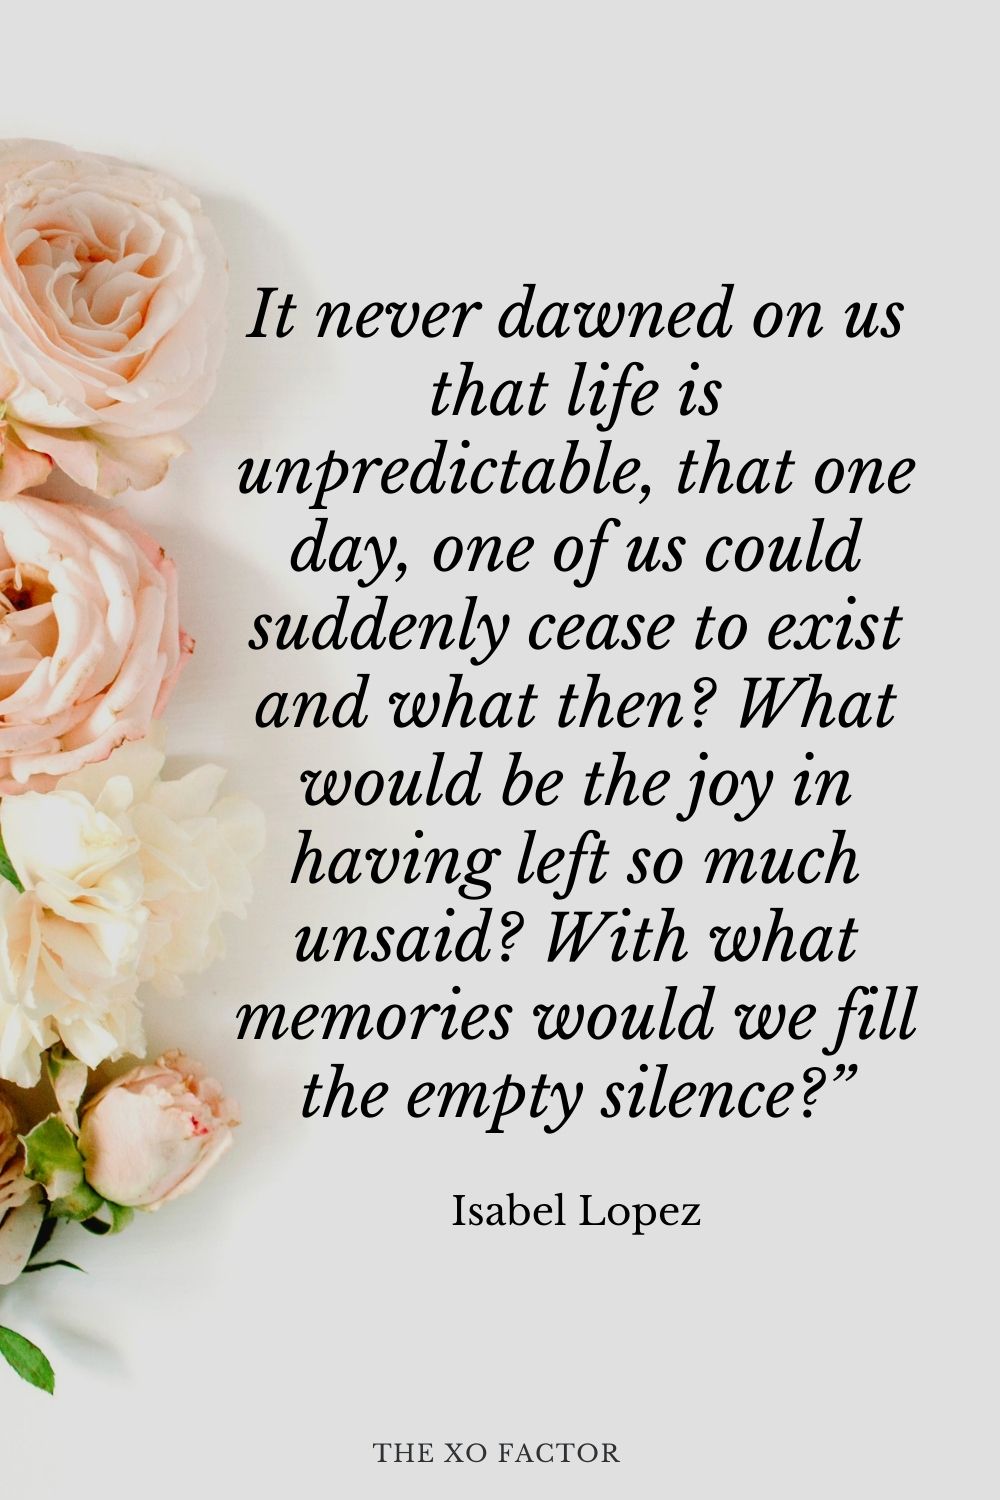 It never dawned on us that life is unpredictable, that one day, one of us could suddenly cease to exist and what then? What would be the joy in having left so much unsaid? With what memories would we fill the empty silence?” Isabel Lopez